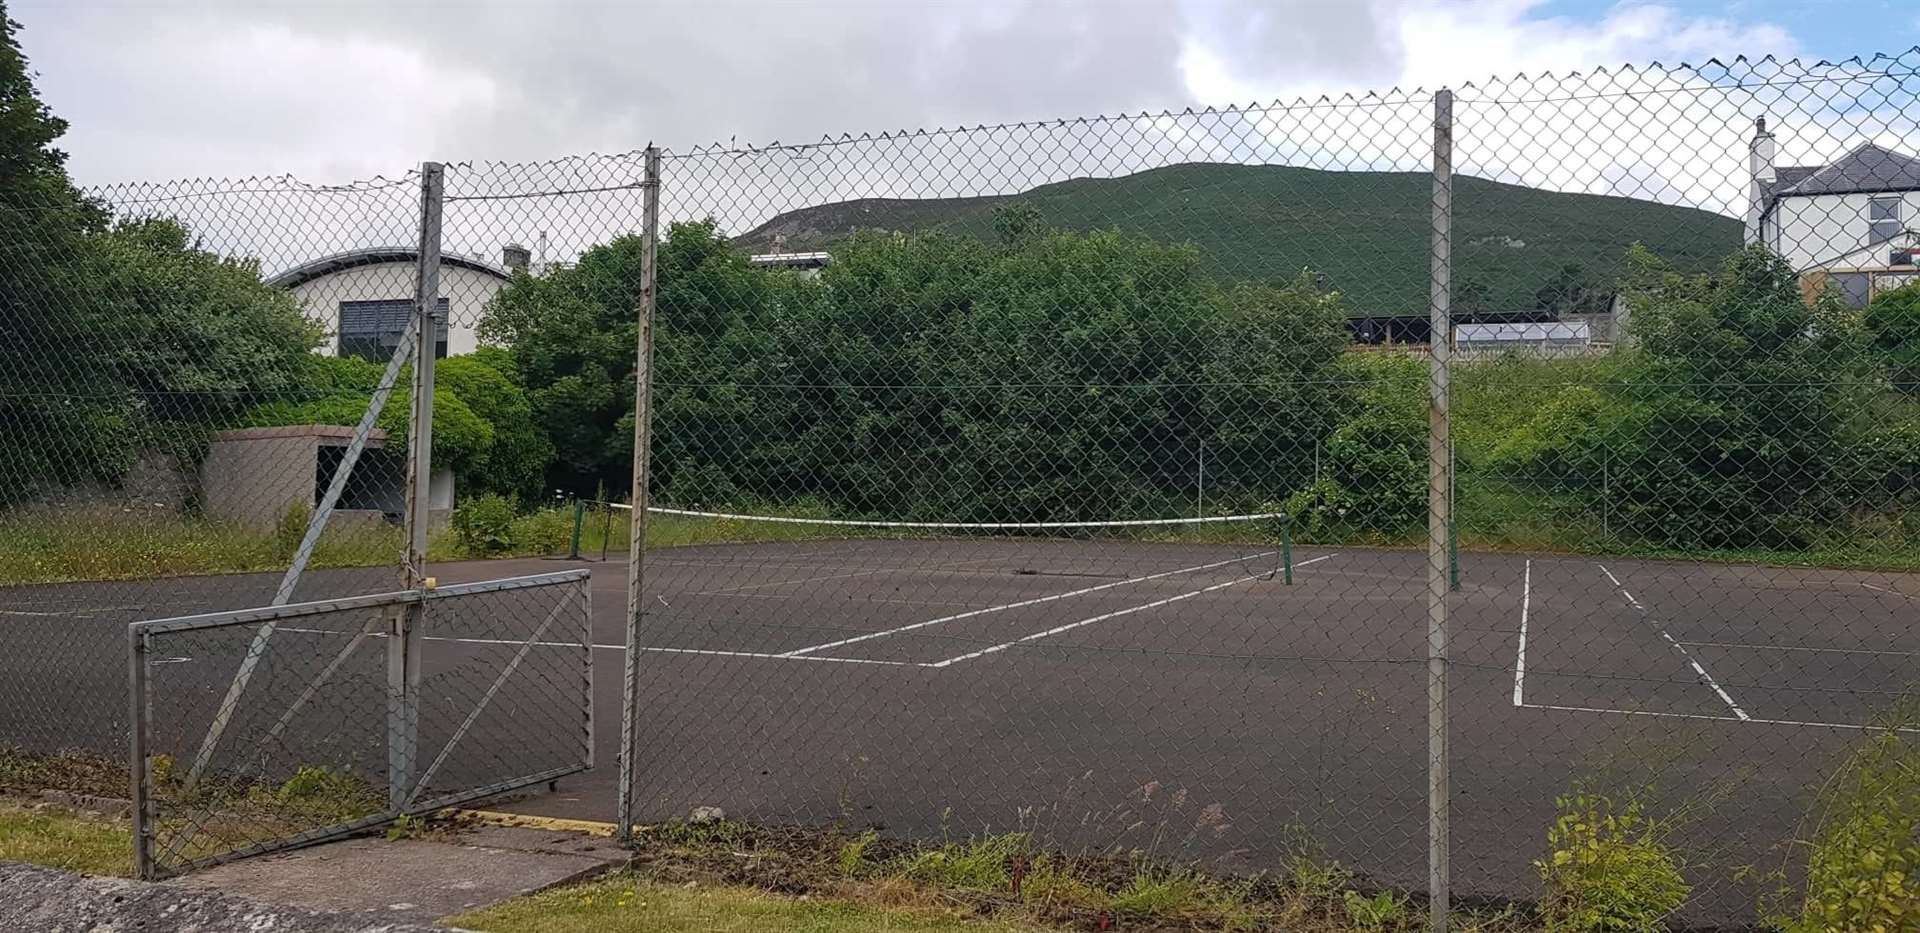 Helmsdale Tennis Courts are set to be transformed into a multi-use games area.